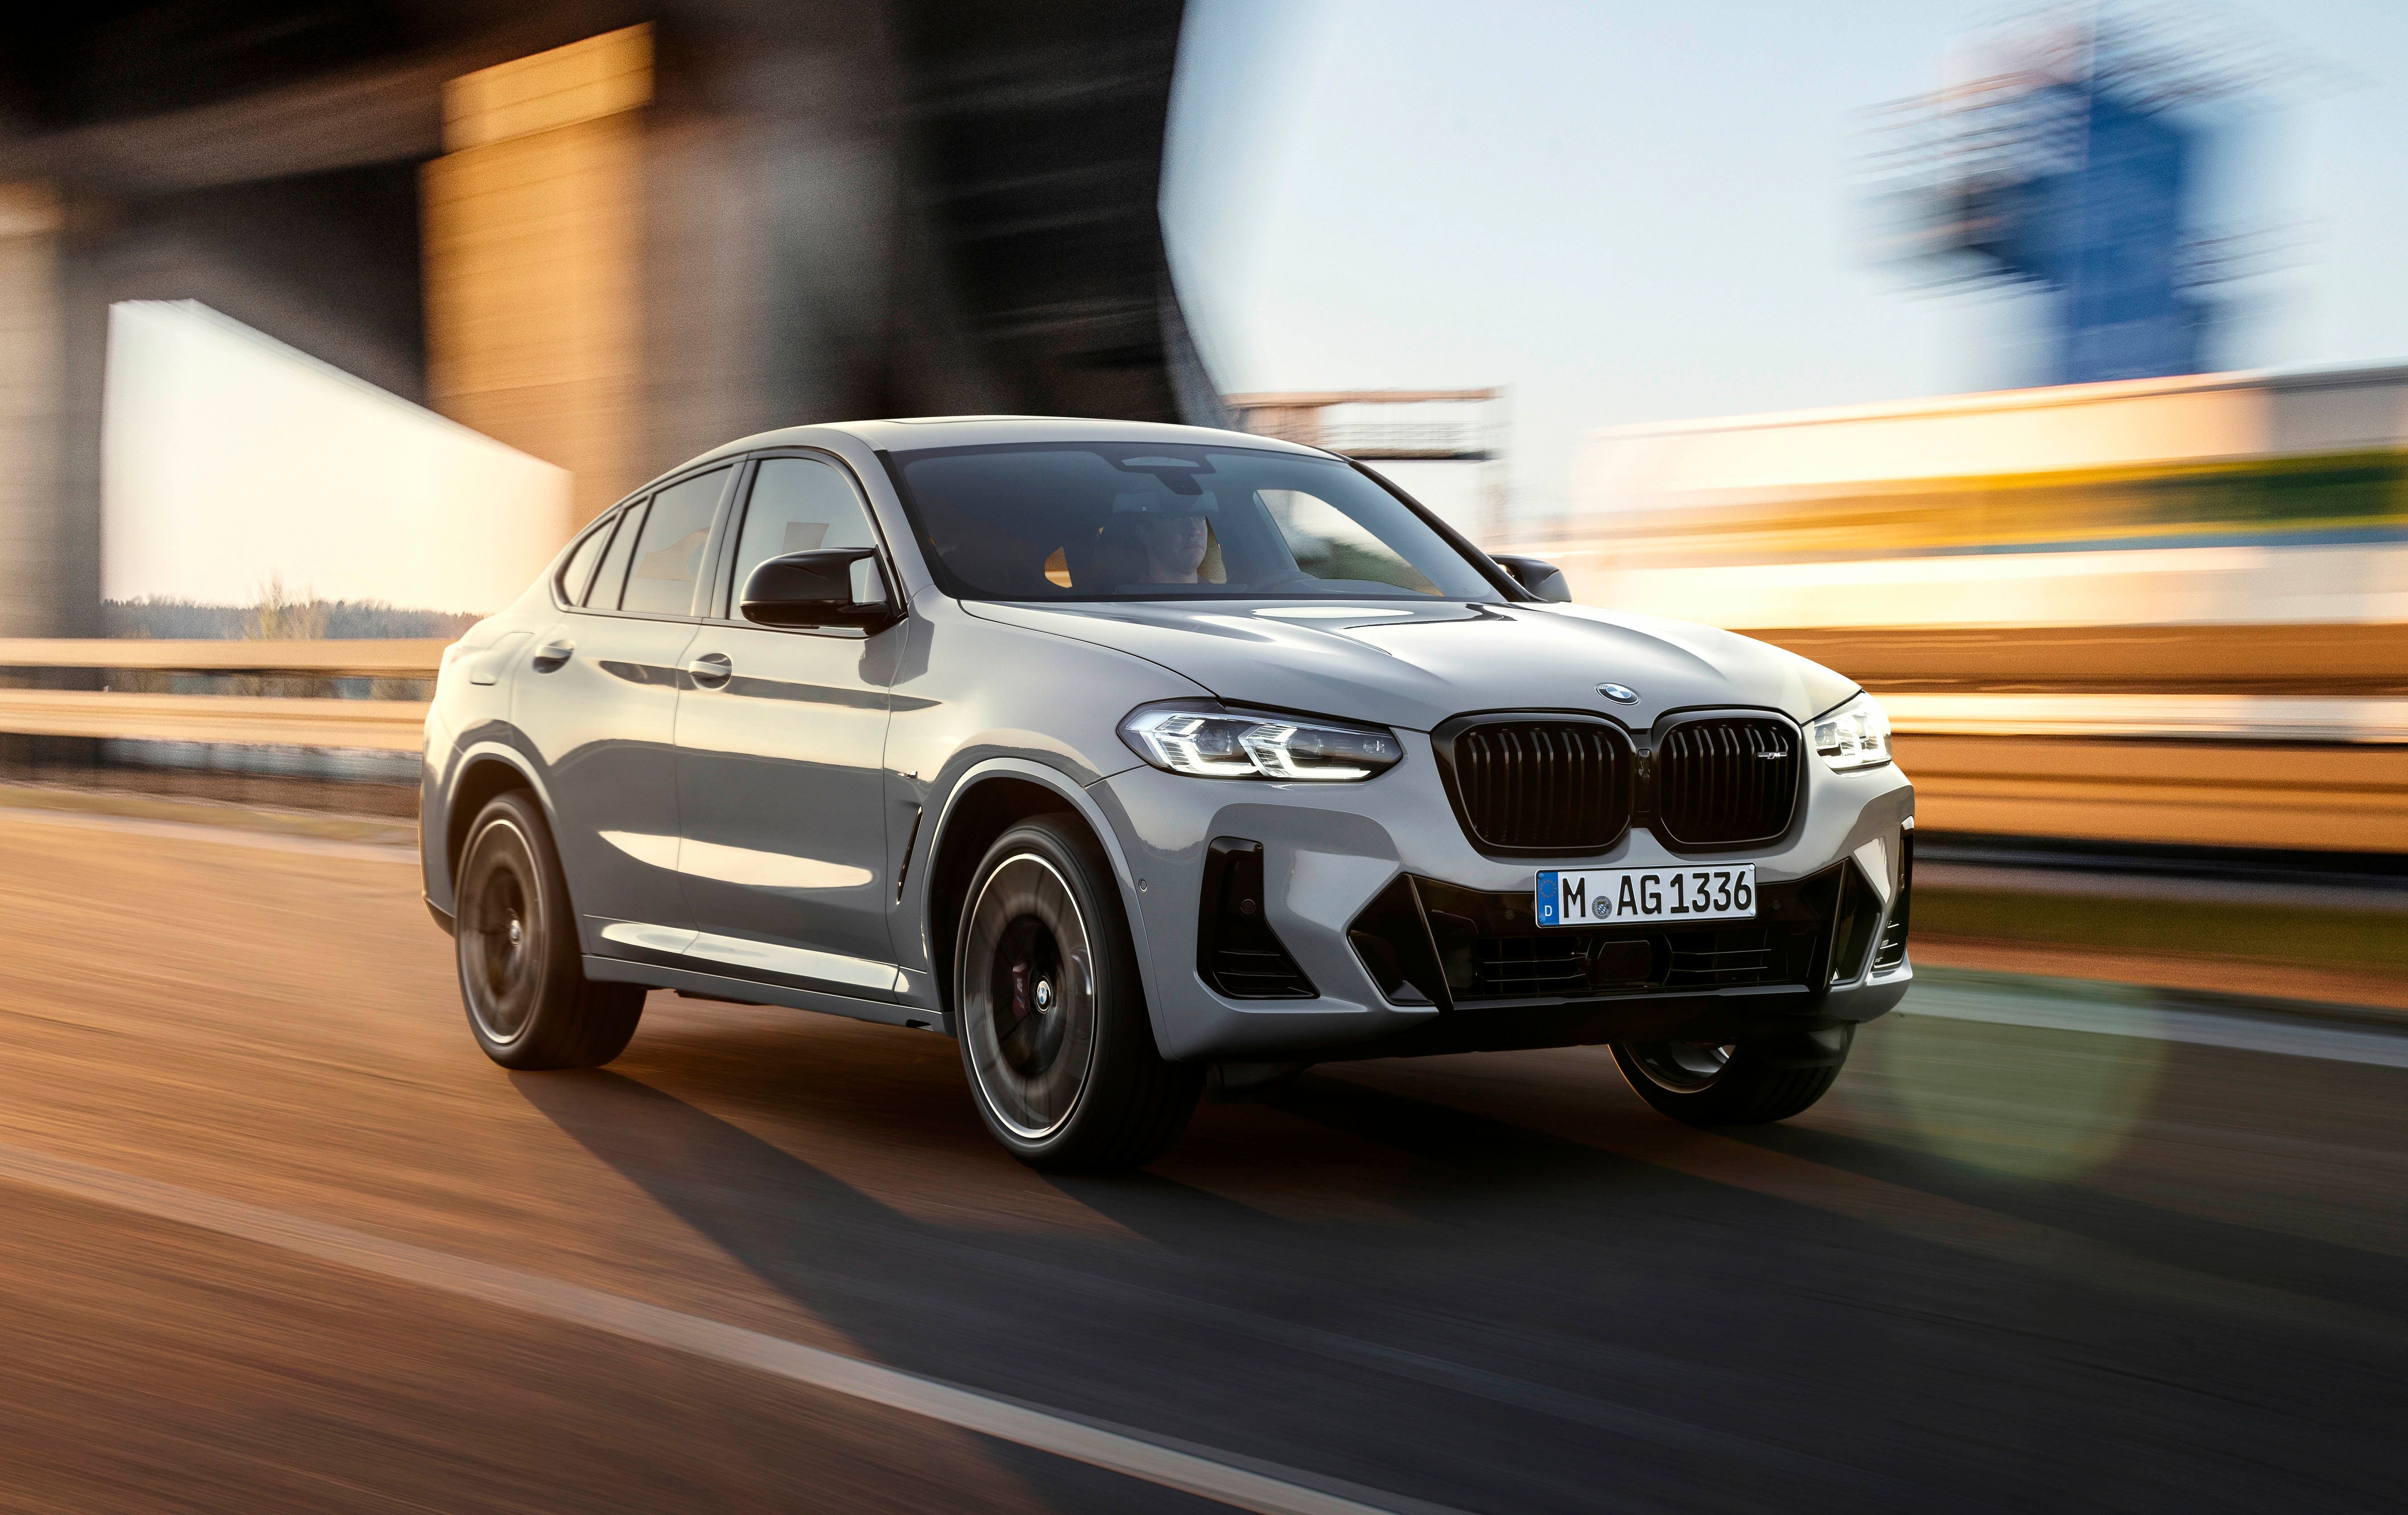 Loaded with edgy presence and power, BMW X4 stands tall in its portfolio